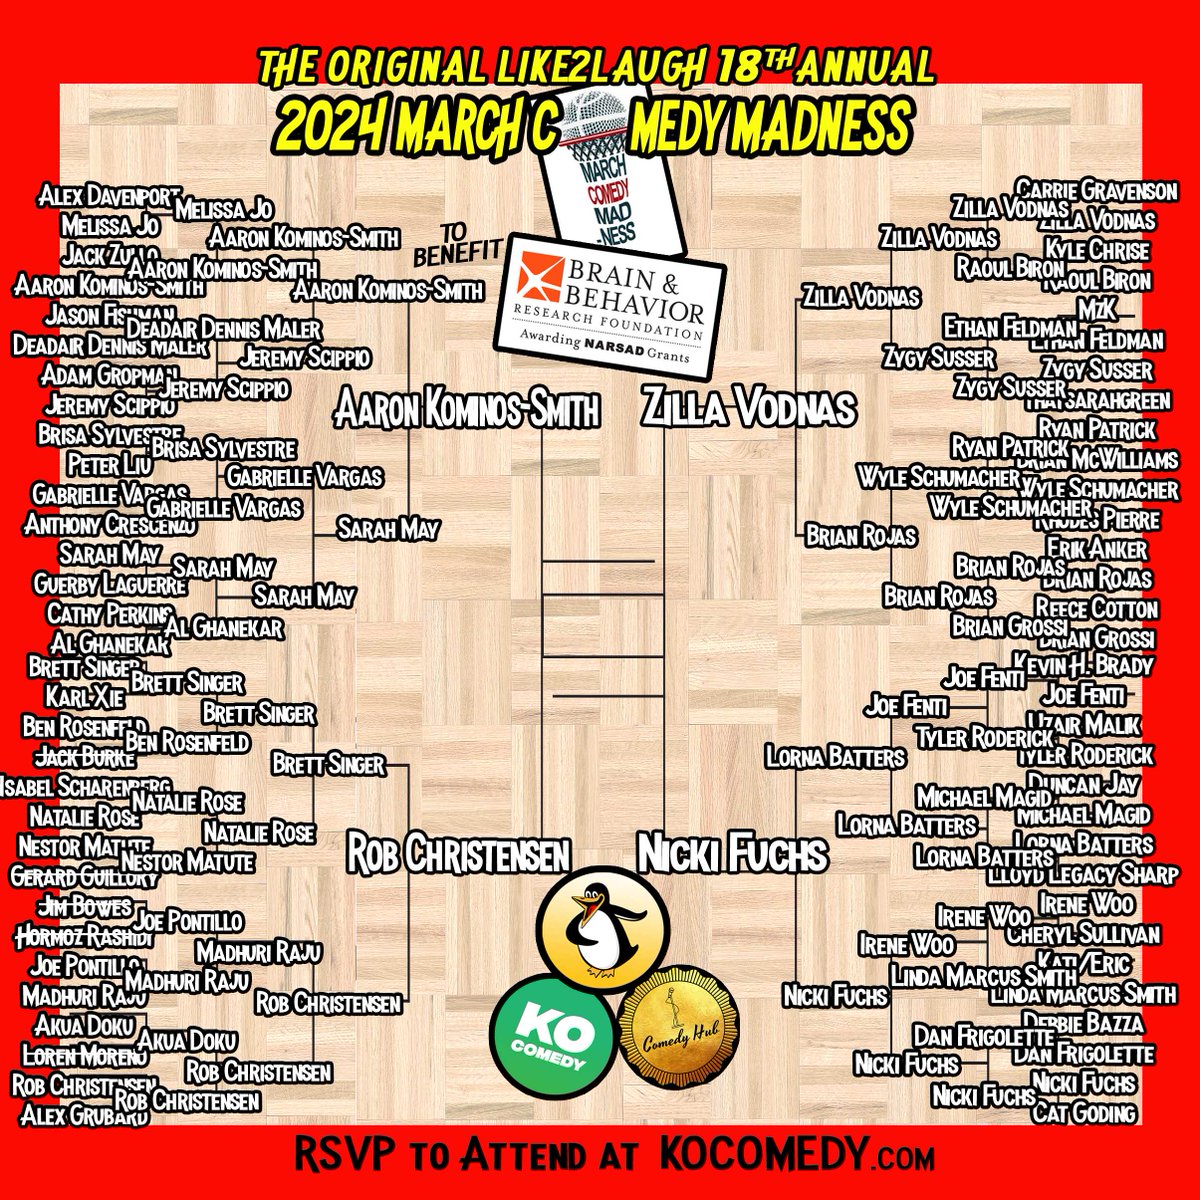 NOW! It's down to the final four. Join us and see who will be our March Comedy Madness 2024 champion! Get your free link at KOComedy.com or watch on Twitch with @ComedyHubLive #KO #Comedy #Sunday #MarchMadness